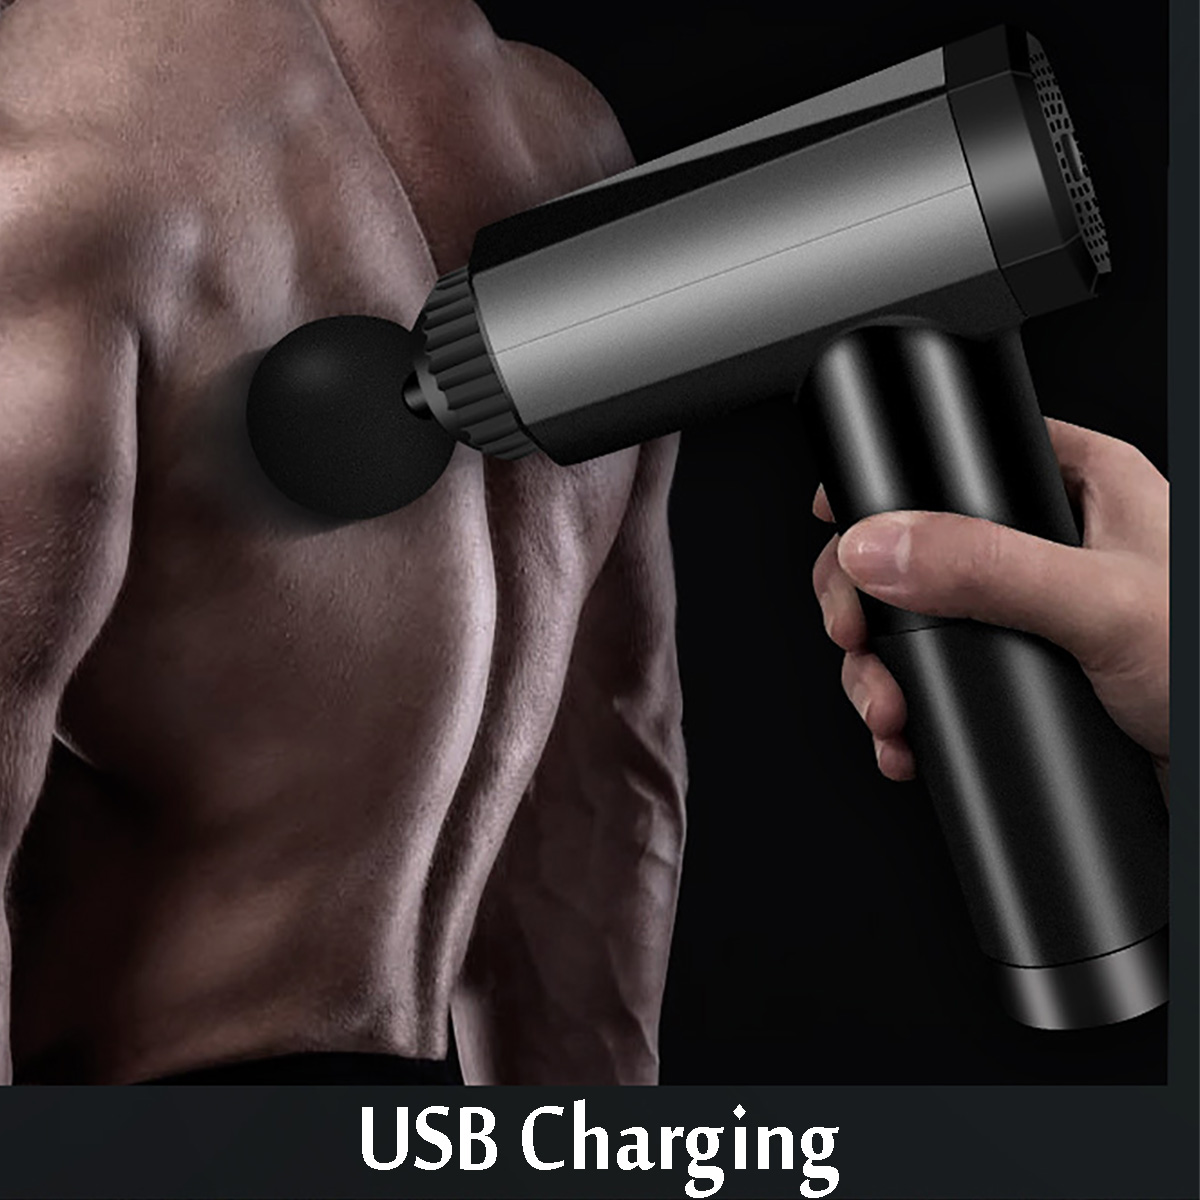 80W-Smart-Touch-LED-Electric-Percussive-Massager-4-Gears-USB-Rechargeable-Deep-Muscle-Shock-Vibratio-1693756-4